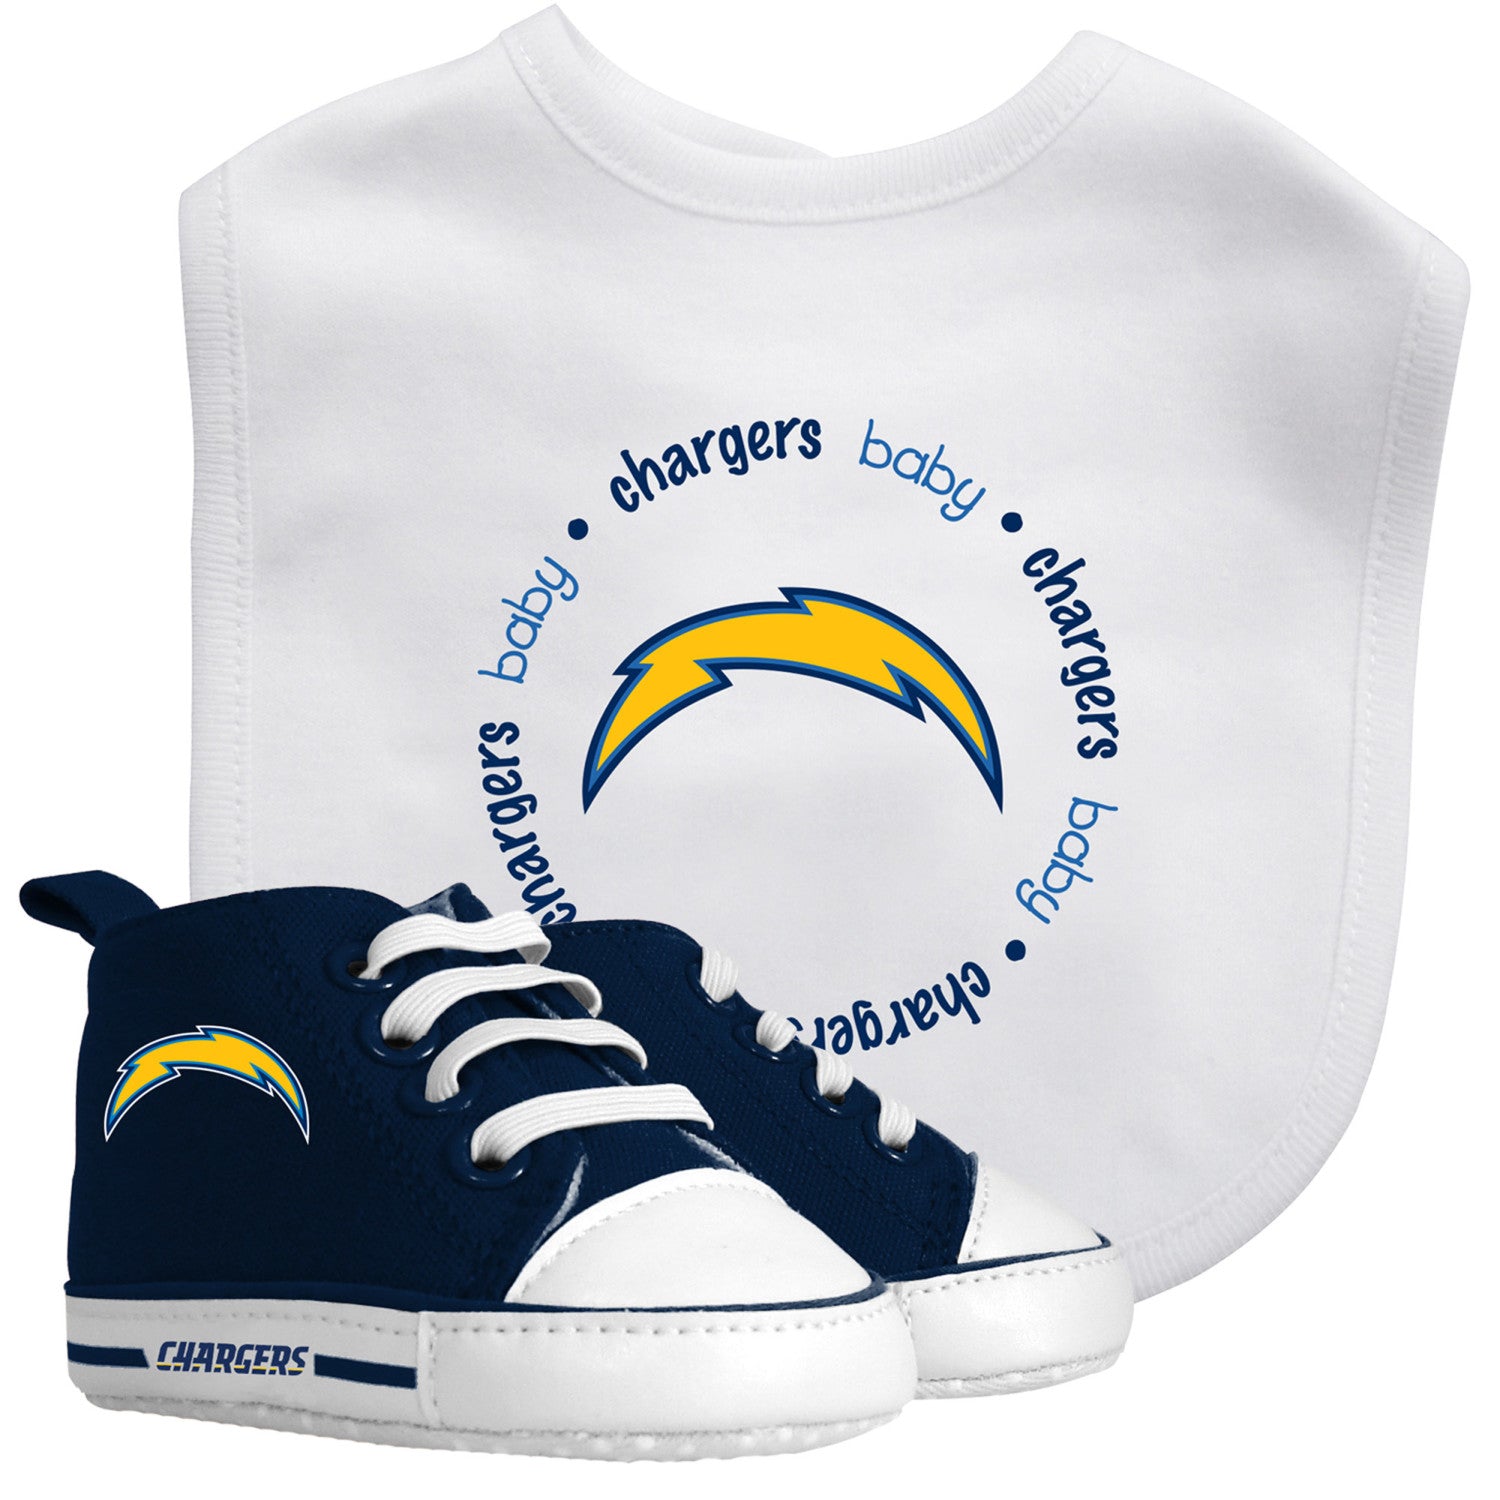 Los Angeles Chargers - 2-Piece Baby Gift Set